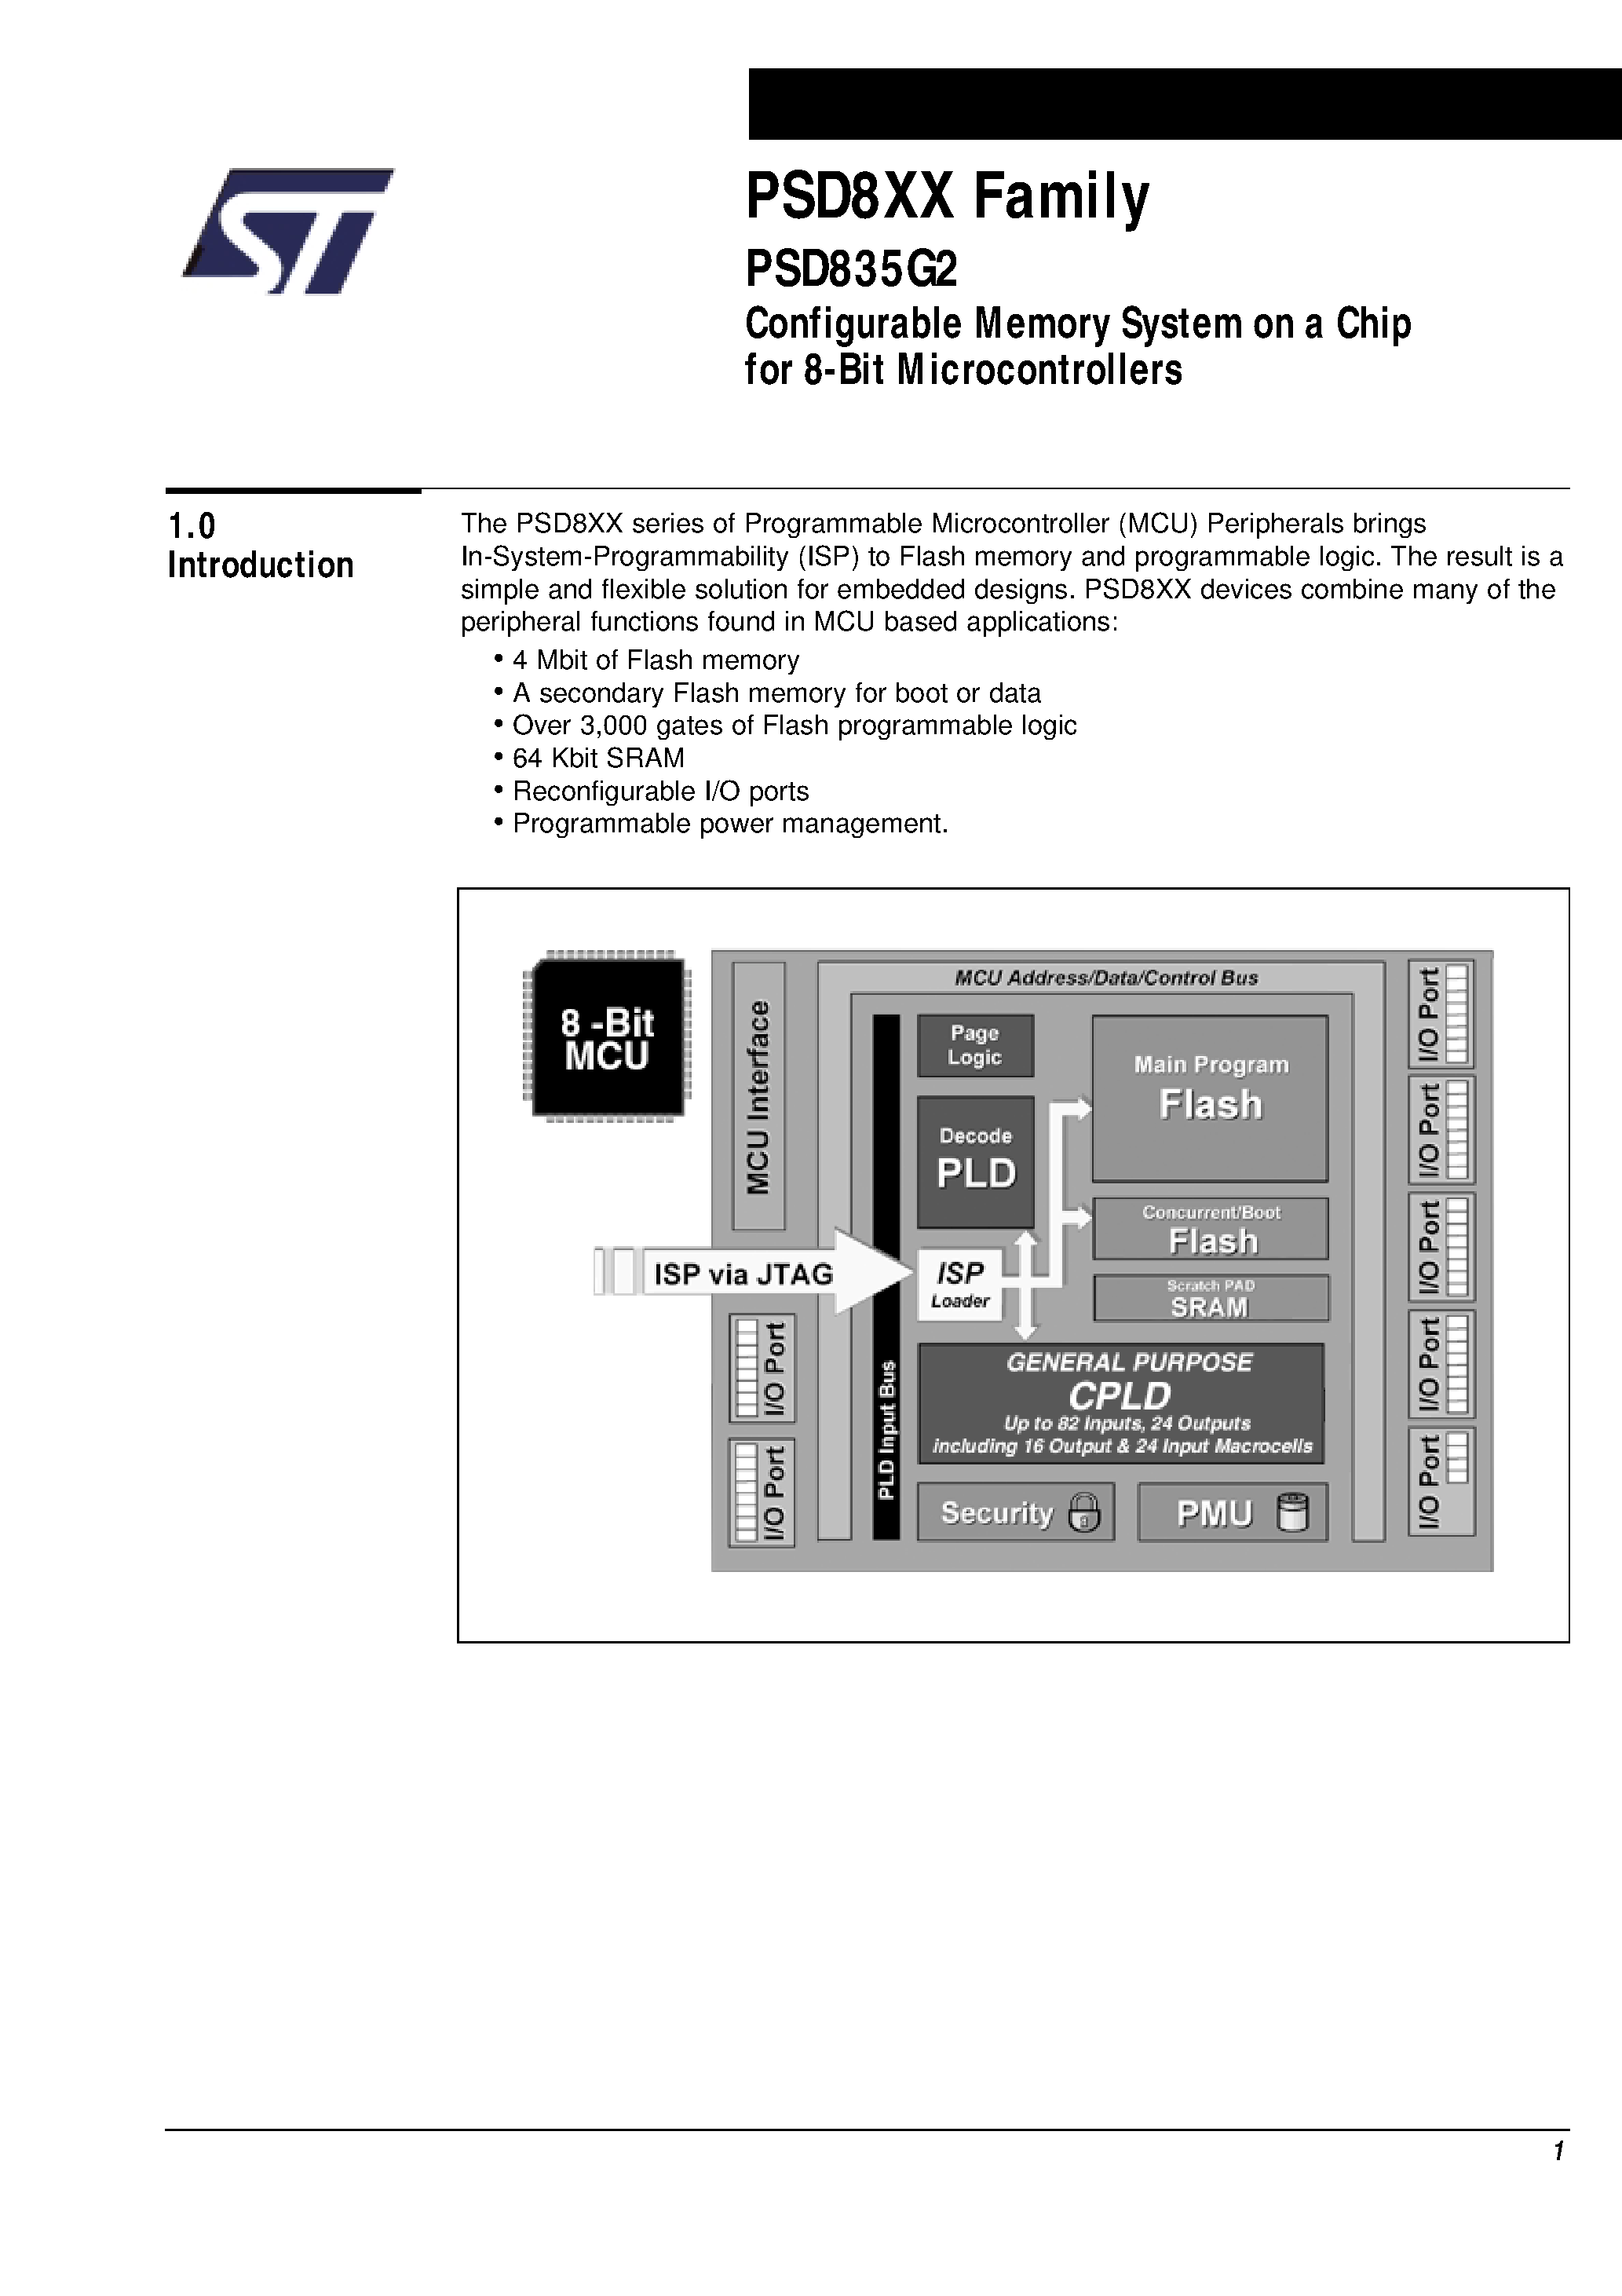 Datasheet PSD835F1-A-90J - Configurable Memory System on a Chip for 8-Bit Microcontrollers page 2